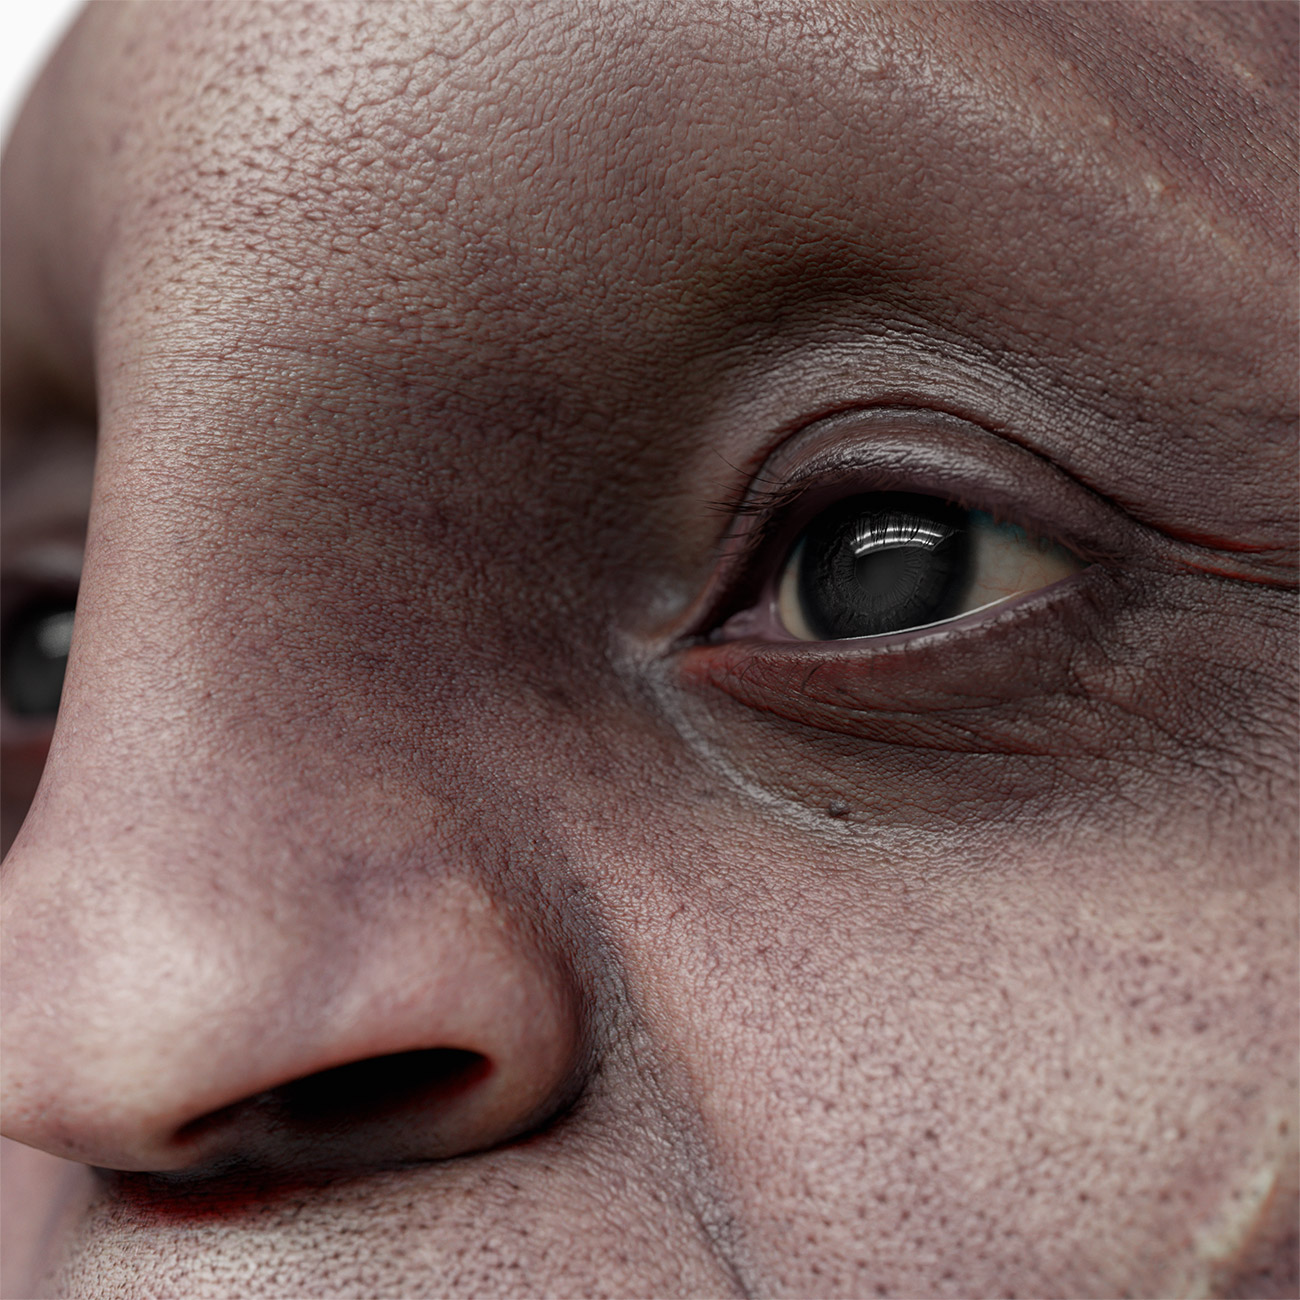 Download our high res 3d face models